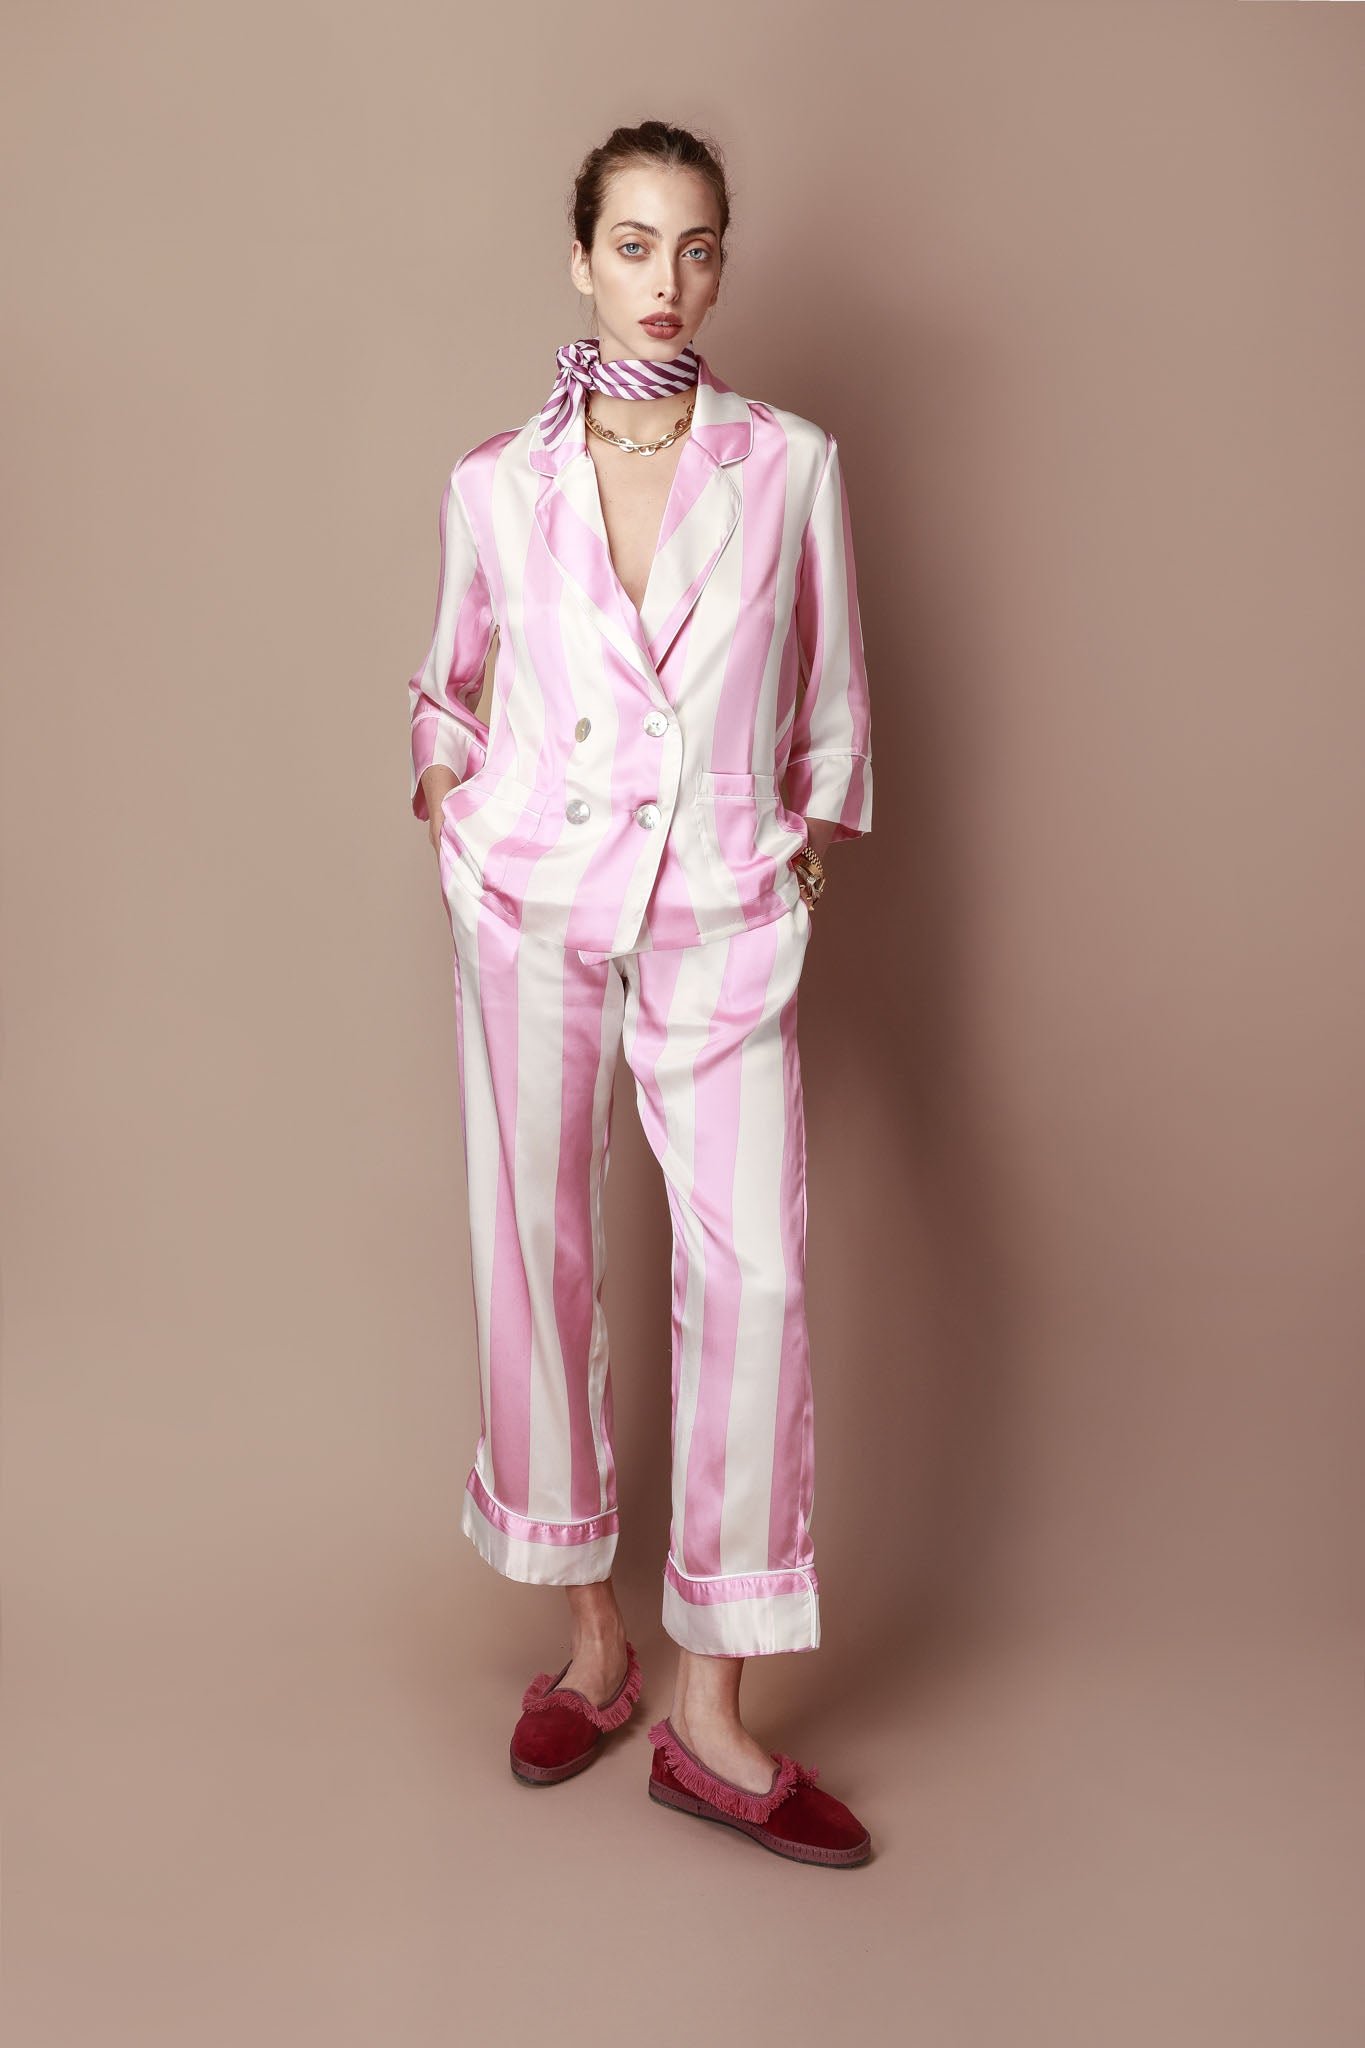 Silk Pajama Set in Striped Pastel Pink and White from the In Me I Trust Collection